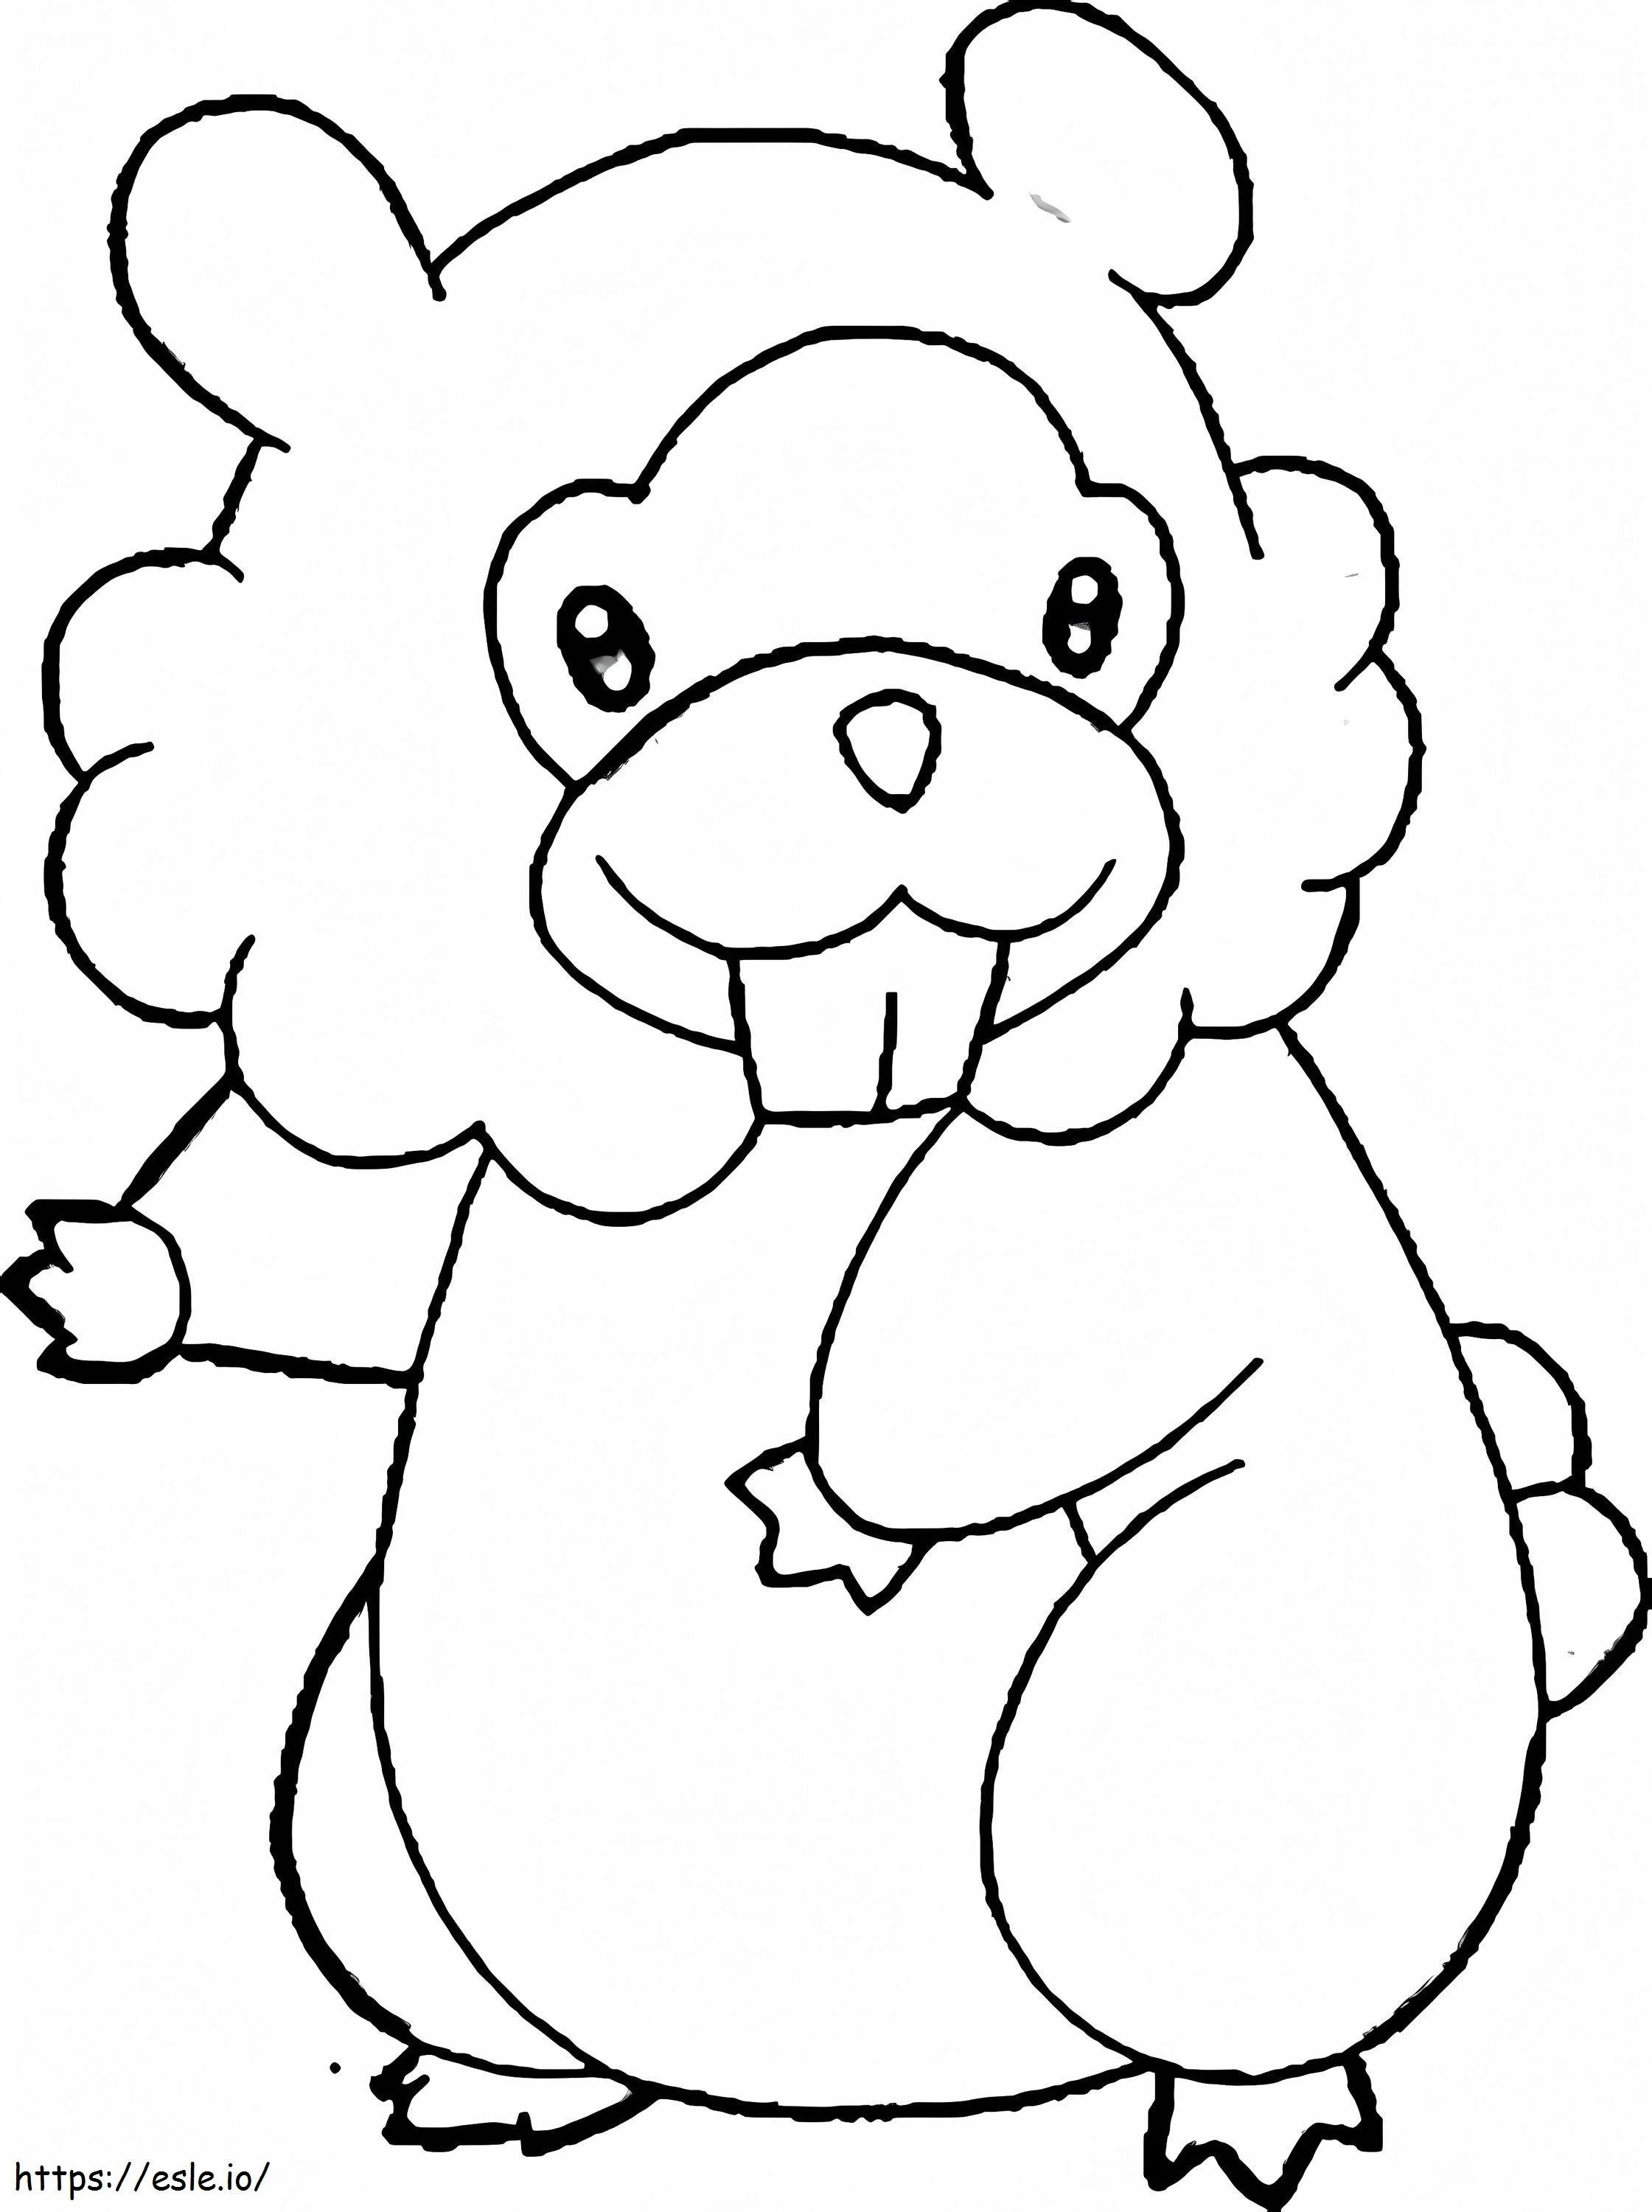 Lovely Bidoof coloring page